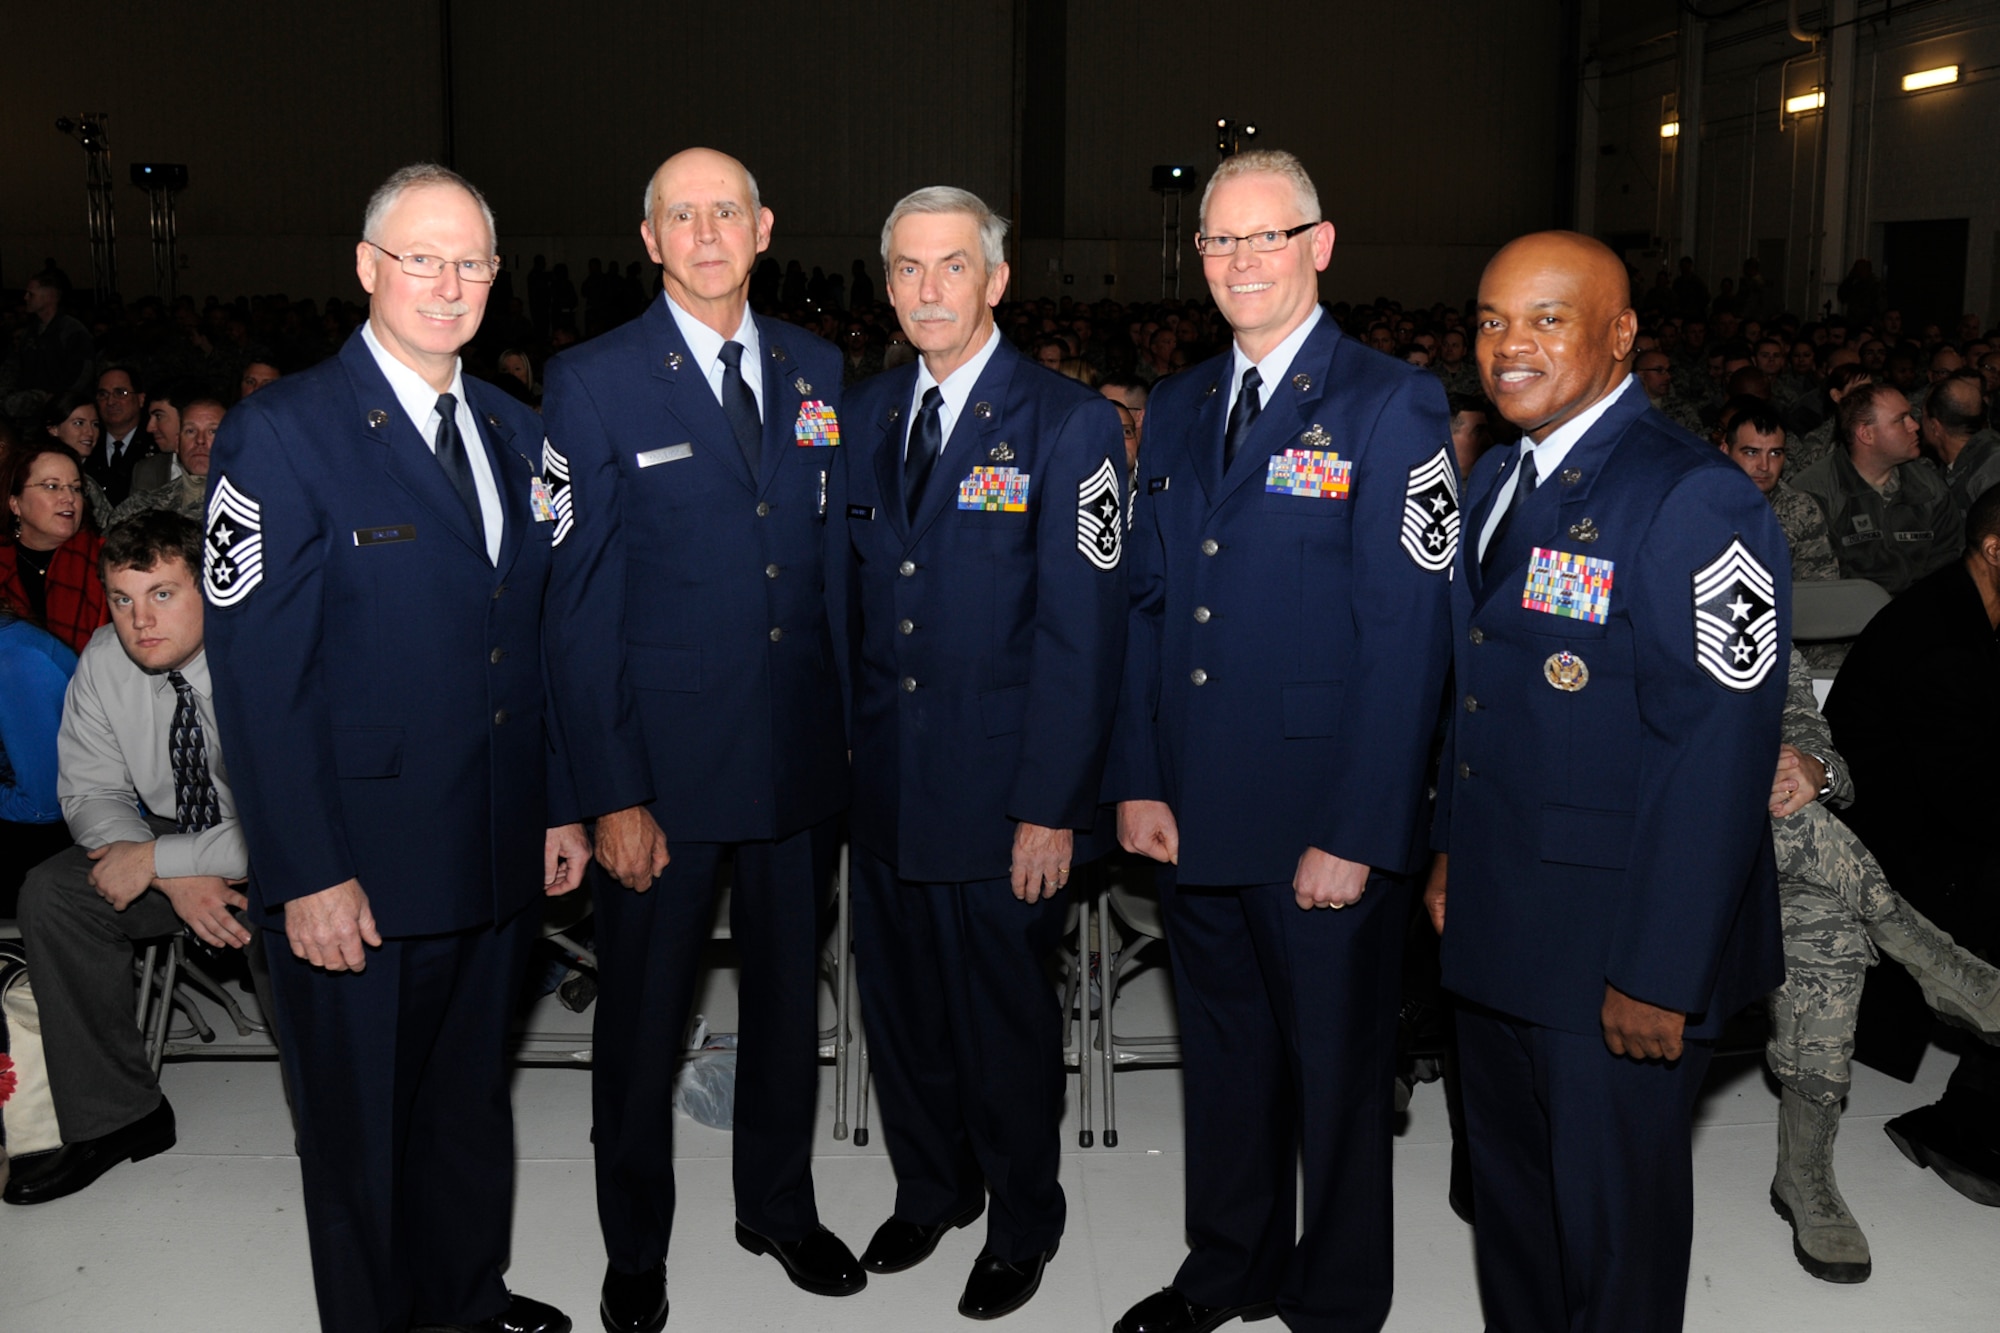 The five most recent command chief master sergeants of the 127th Wing gather at Selfridge Air National Guard Base during the annual awards ceremony at the base, Dec. 5, 2015. Pictured are Chief Master Sgts. (ret) Michael Dalton, Stephen Krajewski and Keith Edwards; and Chief Master Sgts. Robert Dobson and Tony Whitehead. During the ceremony, Whitehead replaced Dobson as the Wing’s current command chief. (U.S. Air National Guard photo by Senior Airman Ryan Zeski)